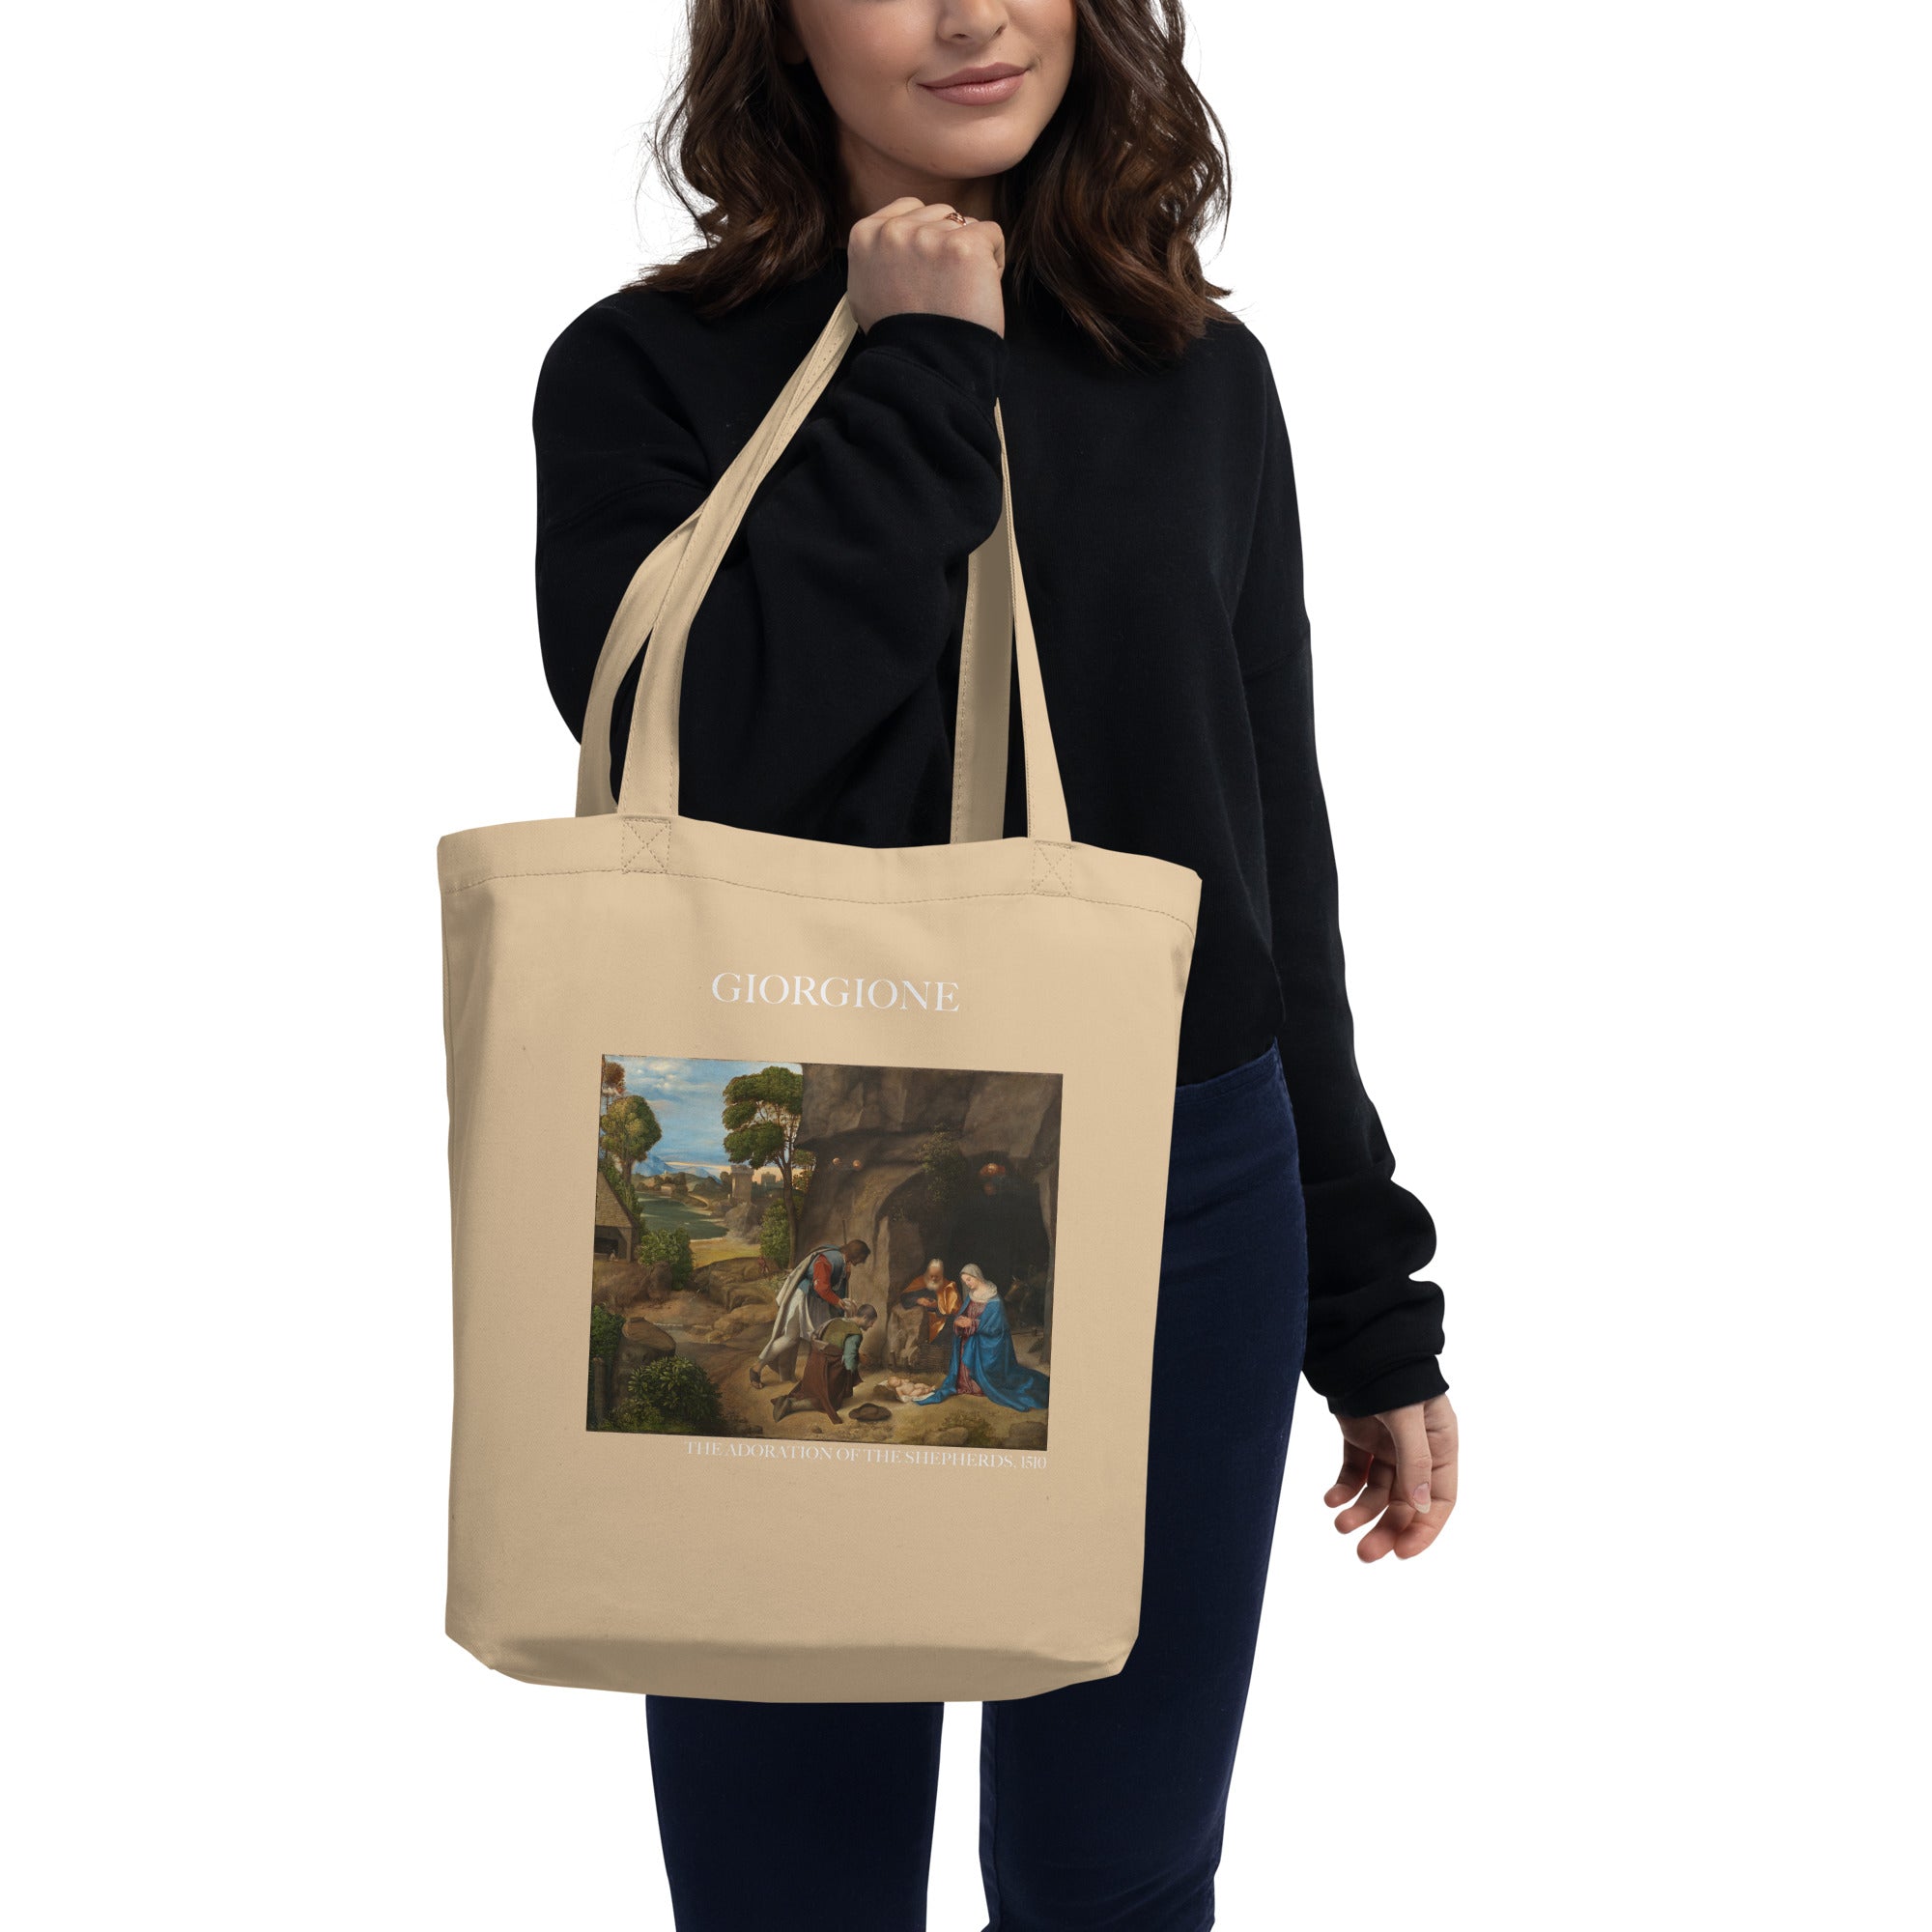 Giorgione 'The Adoration of the Shepherds' Famous Painting Totebag | Eco Friendly Art Tote Bag